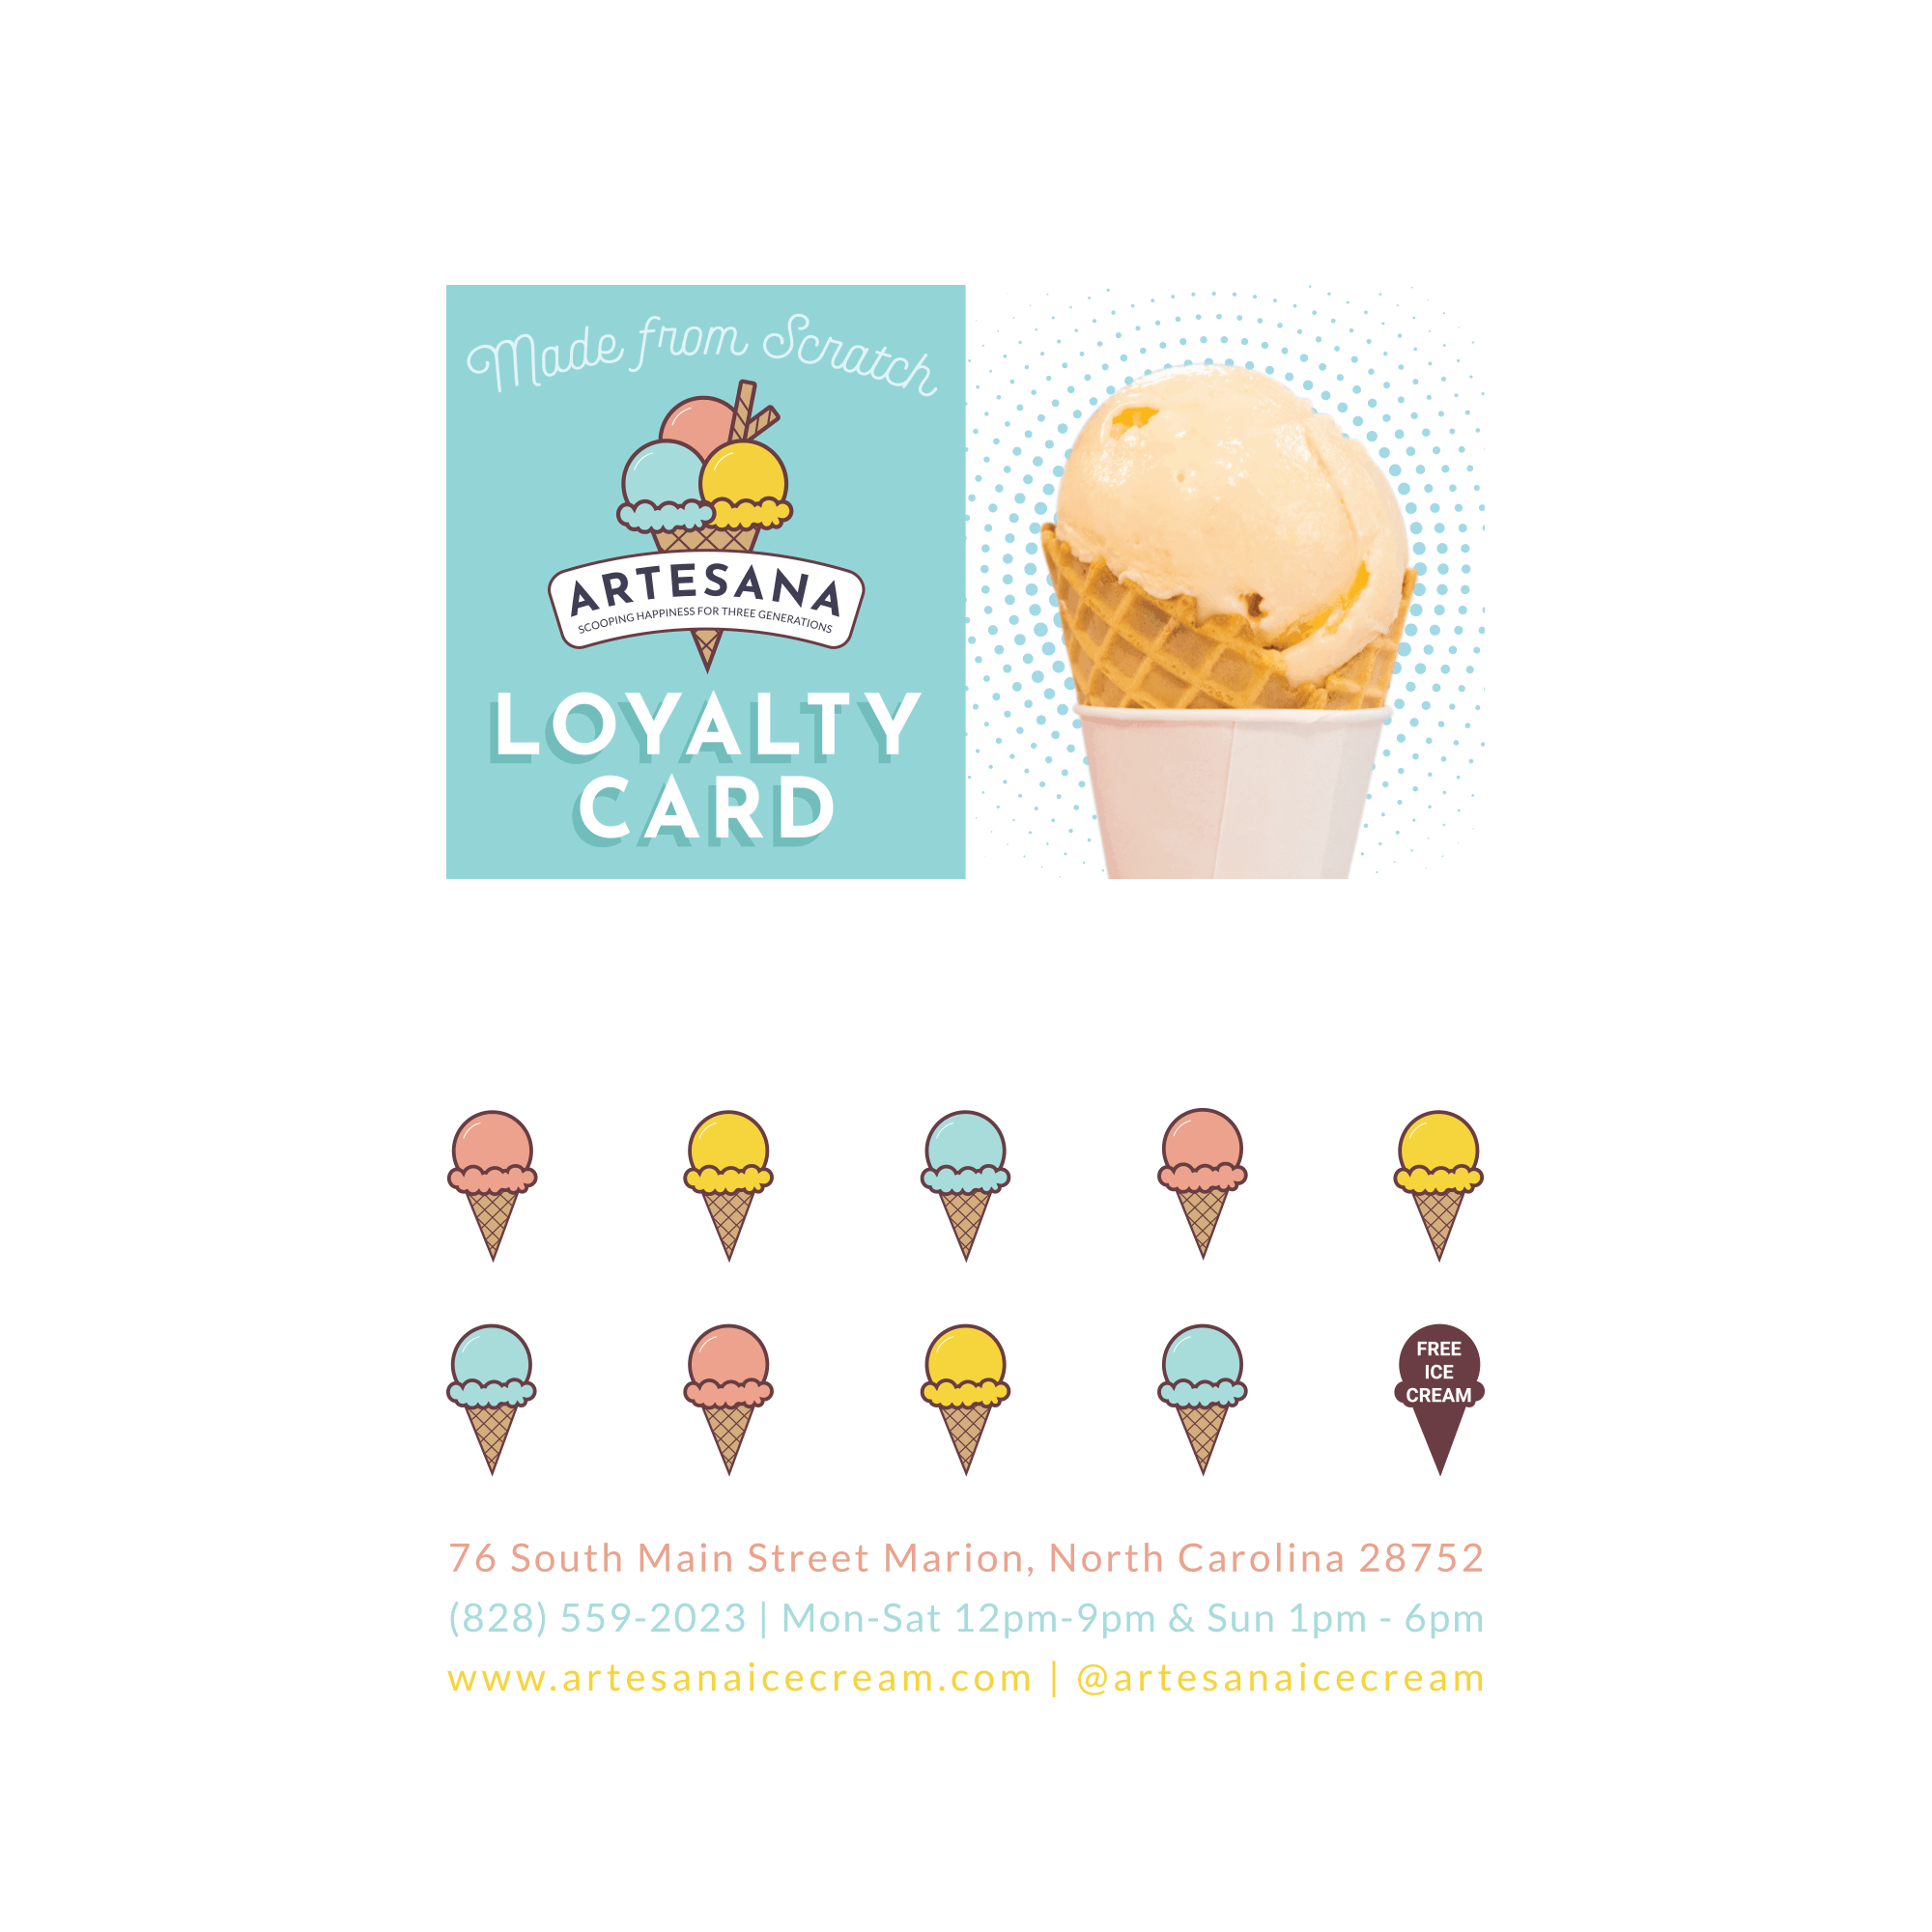 a template of the artesana loyalty card with different illustrations of ice cream cones